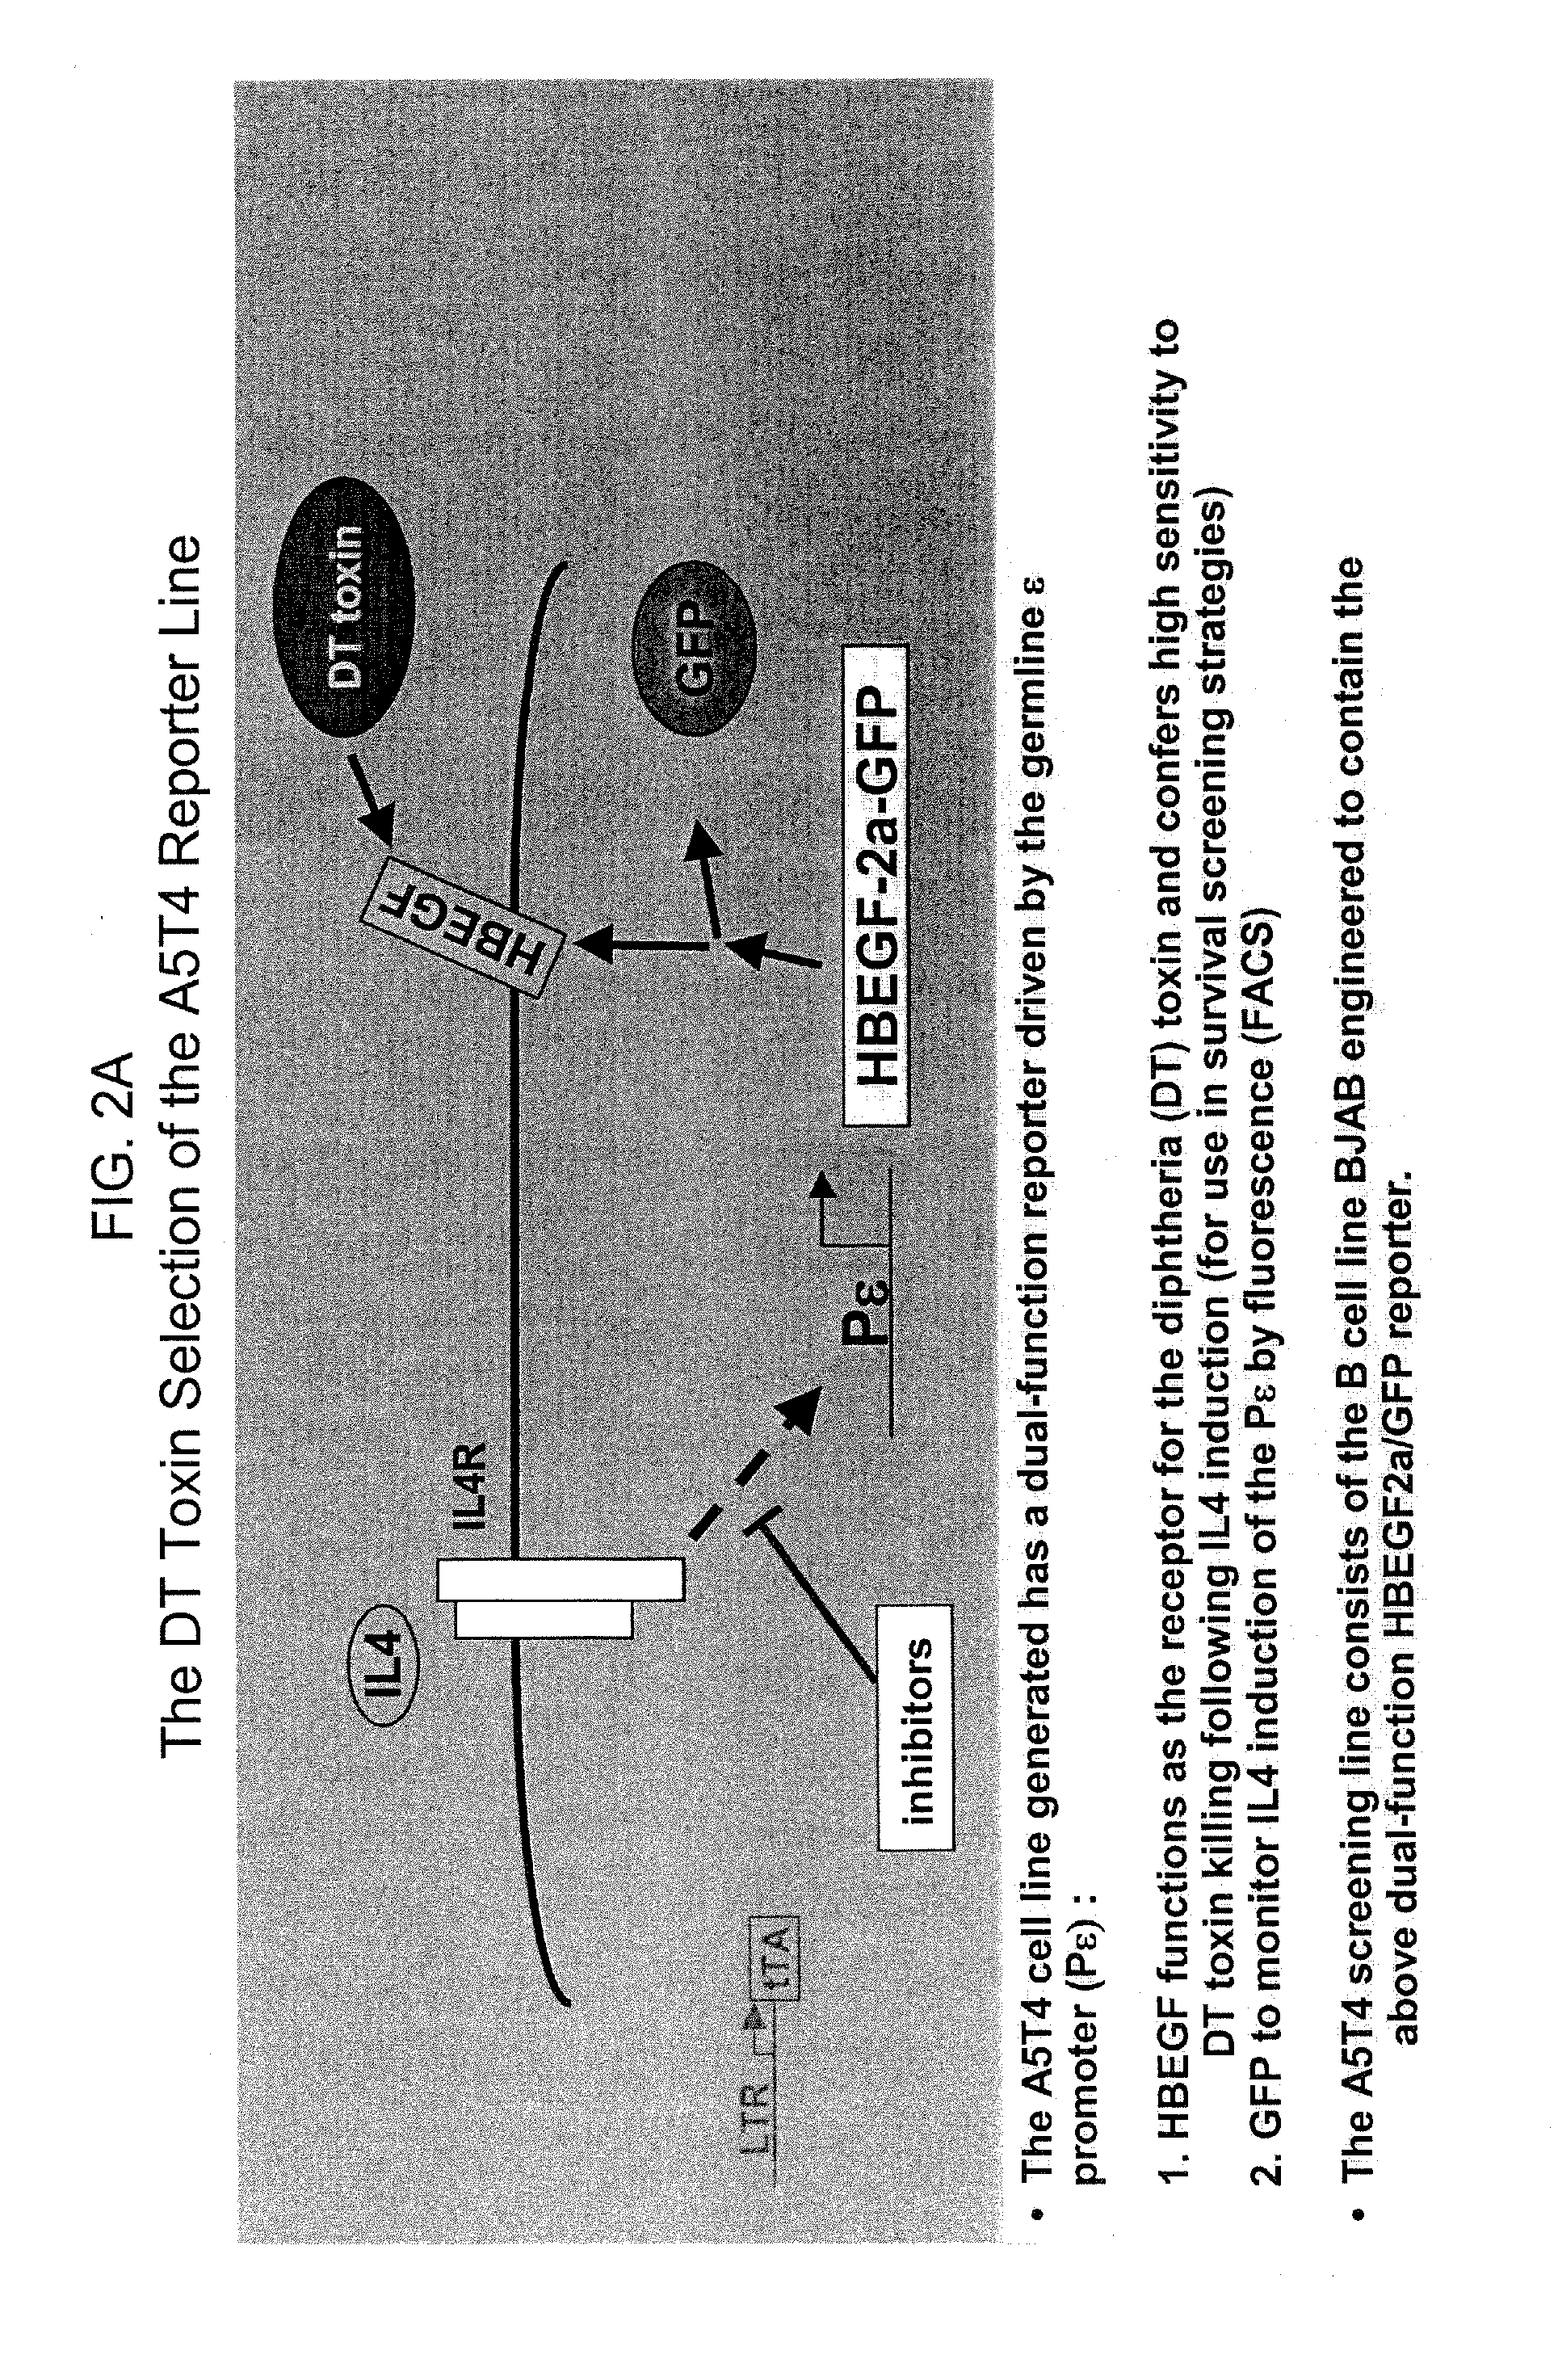 Methods of identifying compounds that modulate il-4 receptor-mediated ige synthesis utilizing a chloride intracellular channel 1 protein